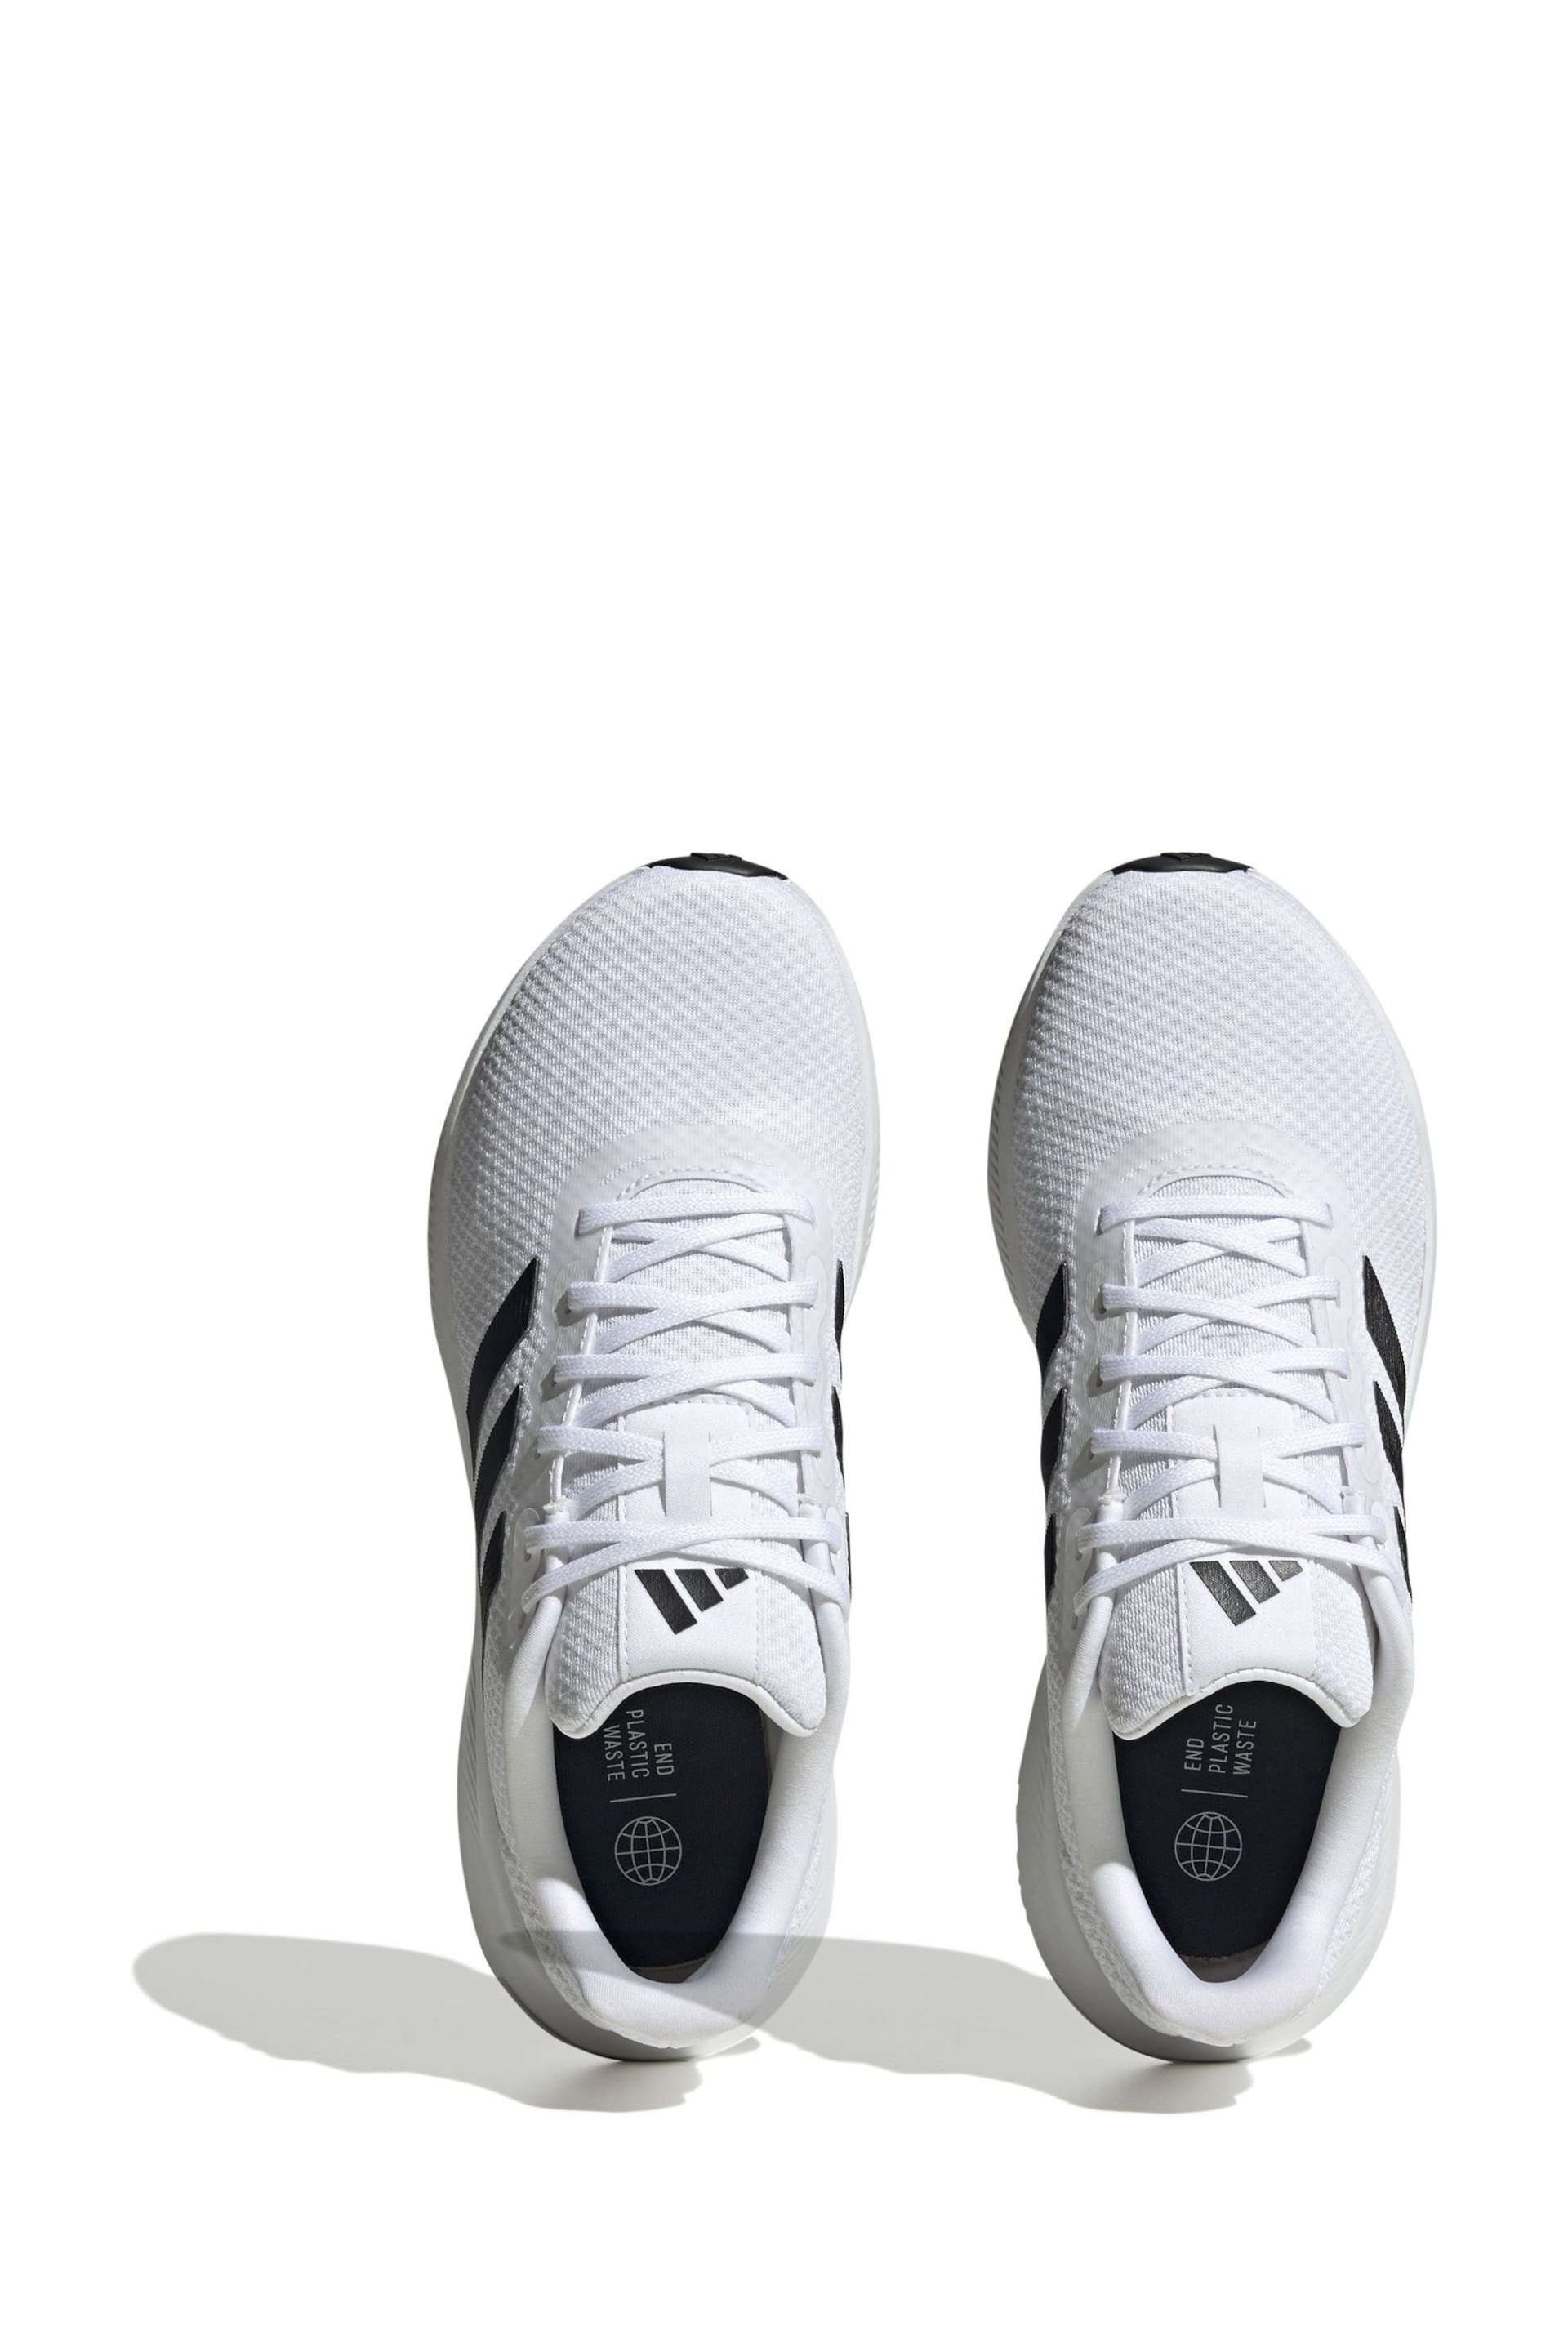 adidas White Runfalcon 3.0 Trainers - Image 6 of 8